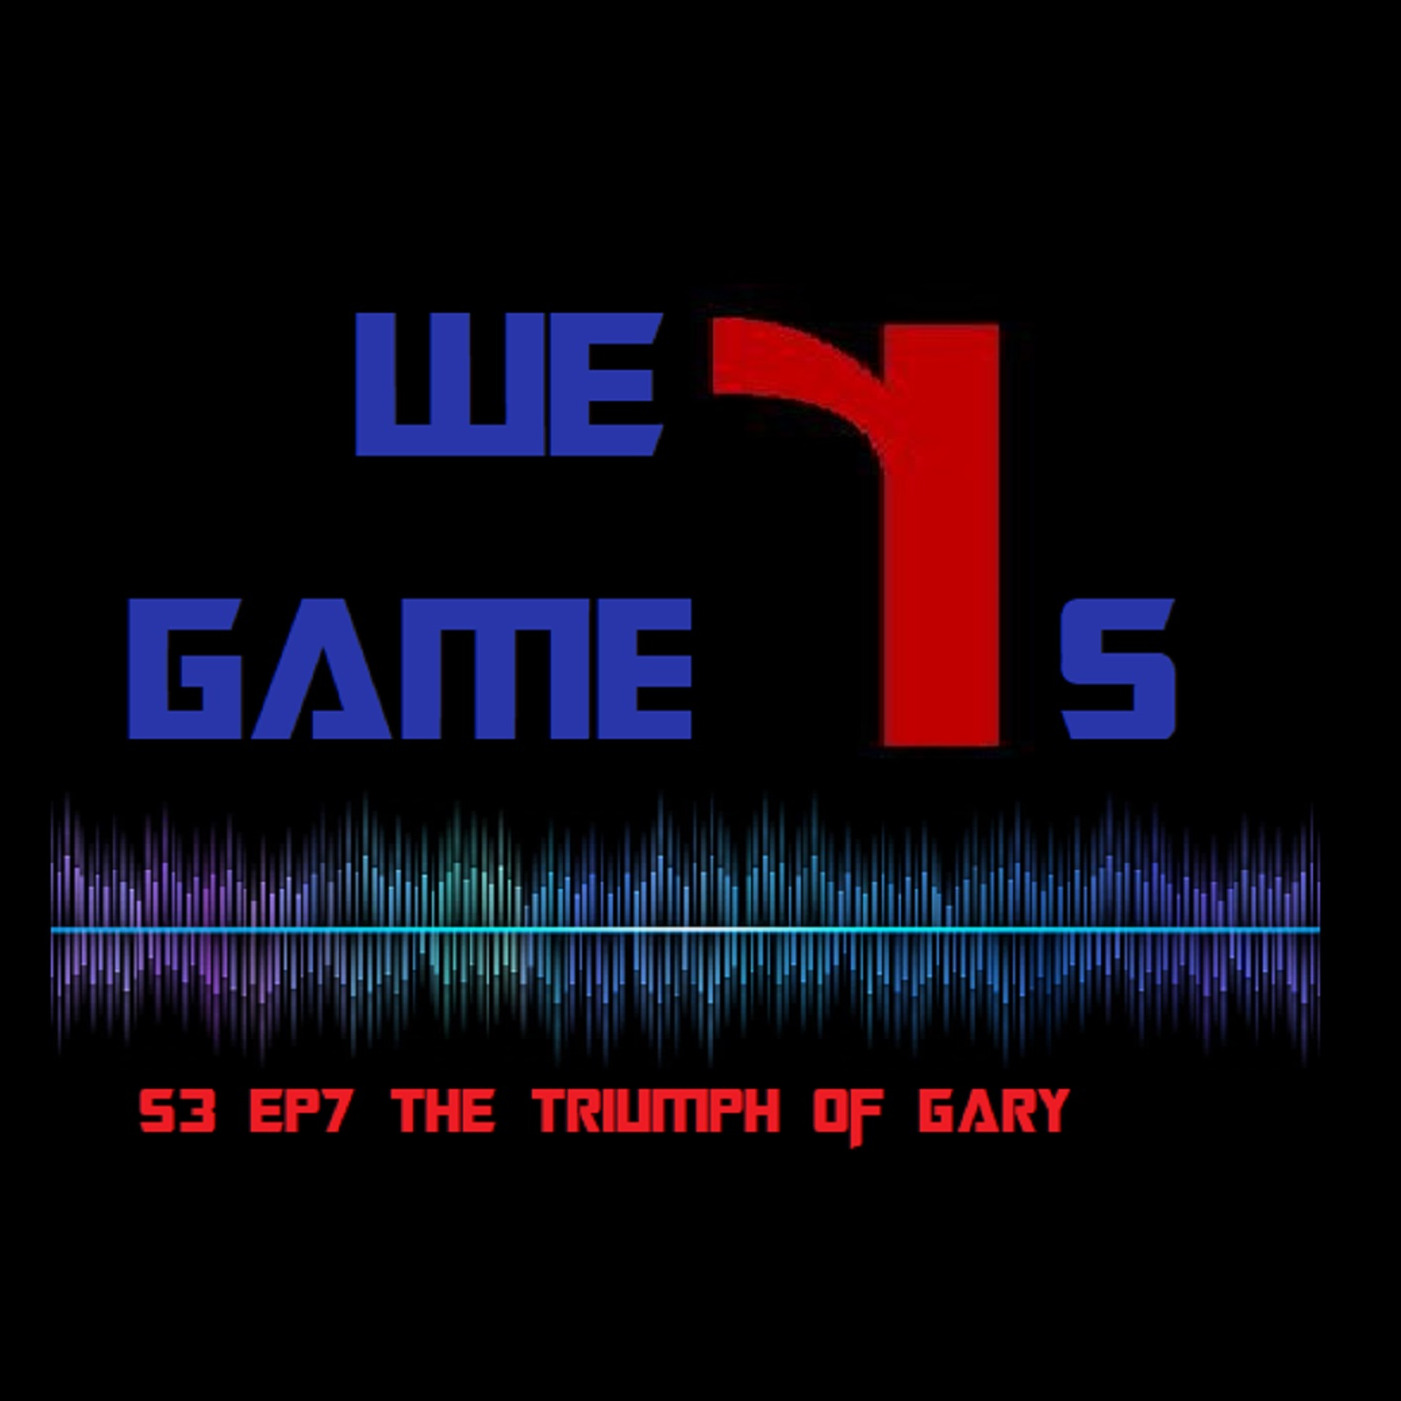 We R Gamers 1v1, The triumph of GARY